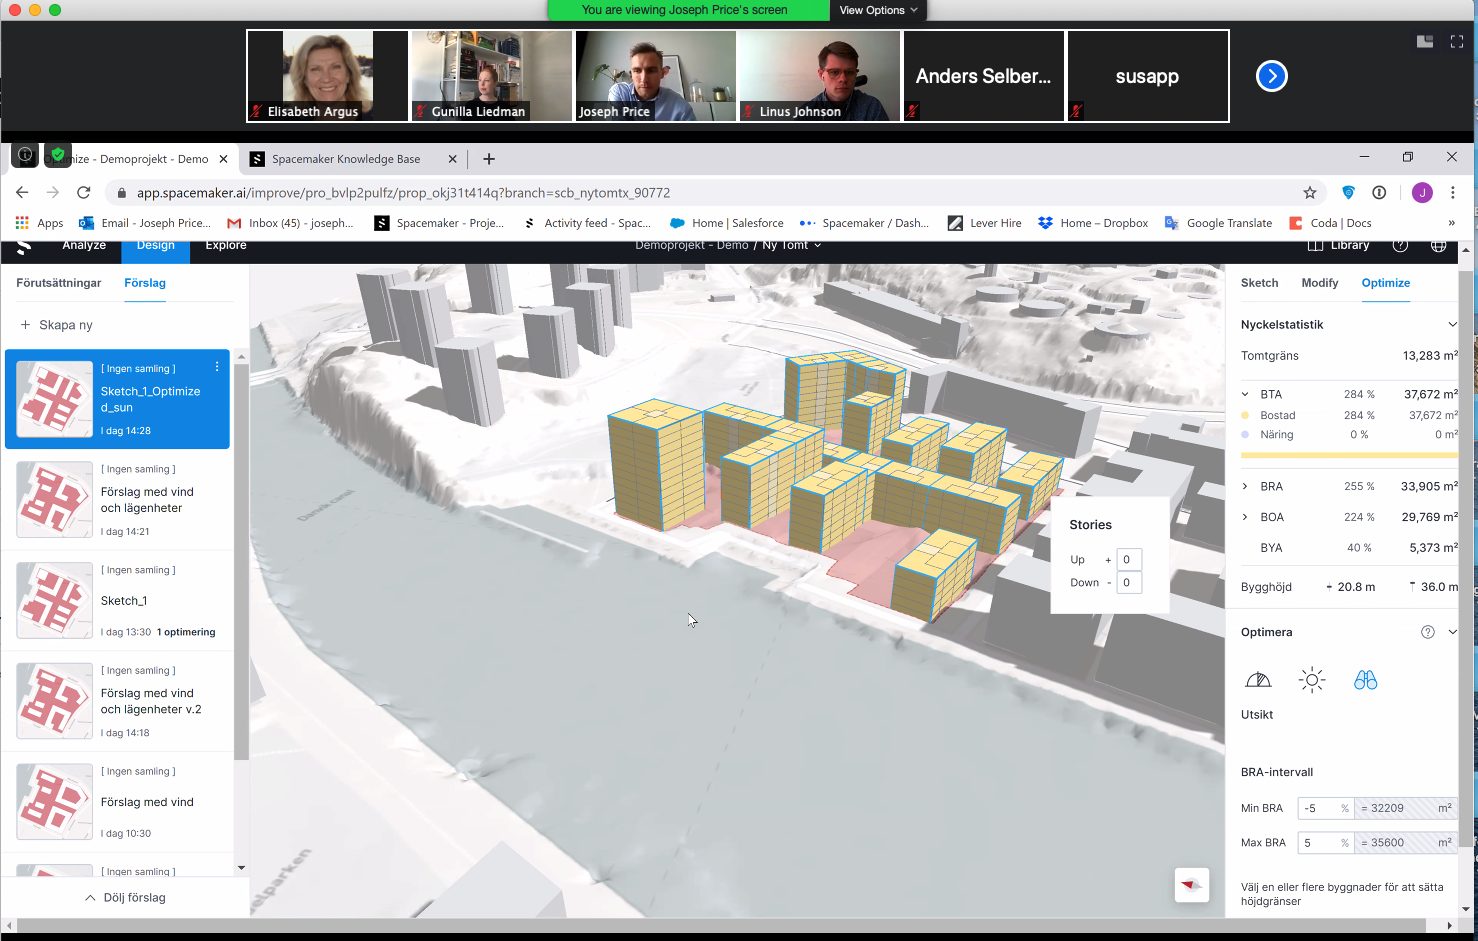 Spacemaker successfully trialled to help municipalities innovate during DigiGrow pilot